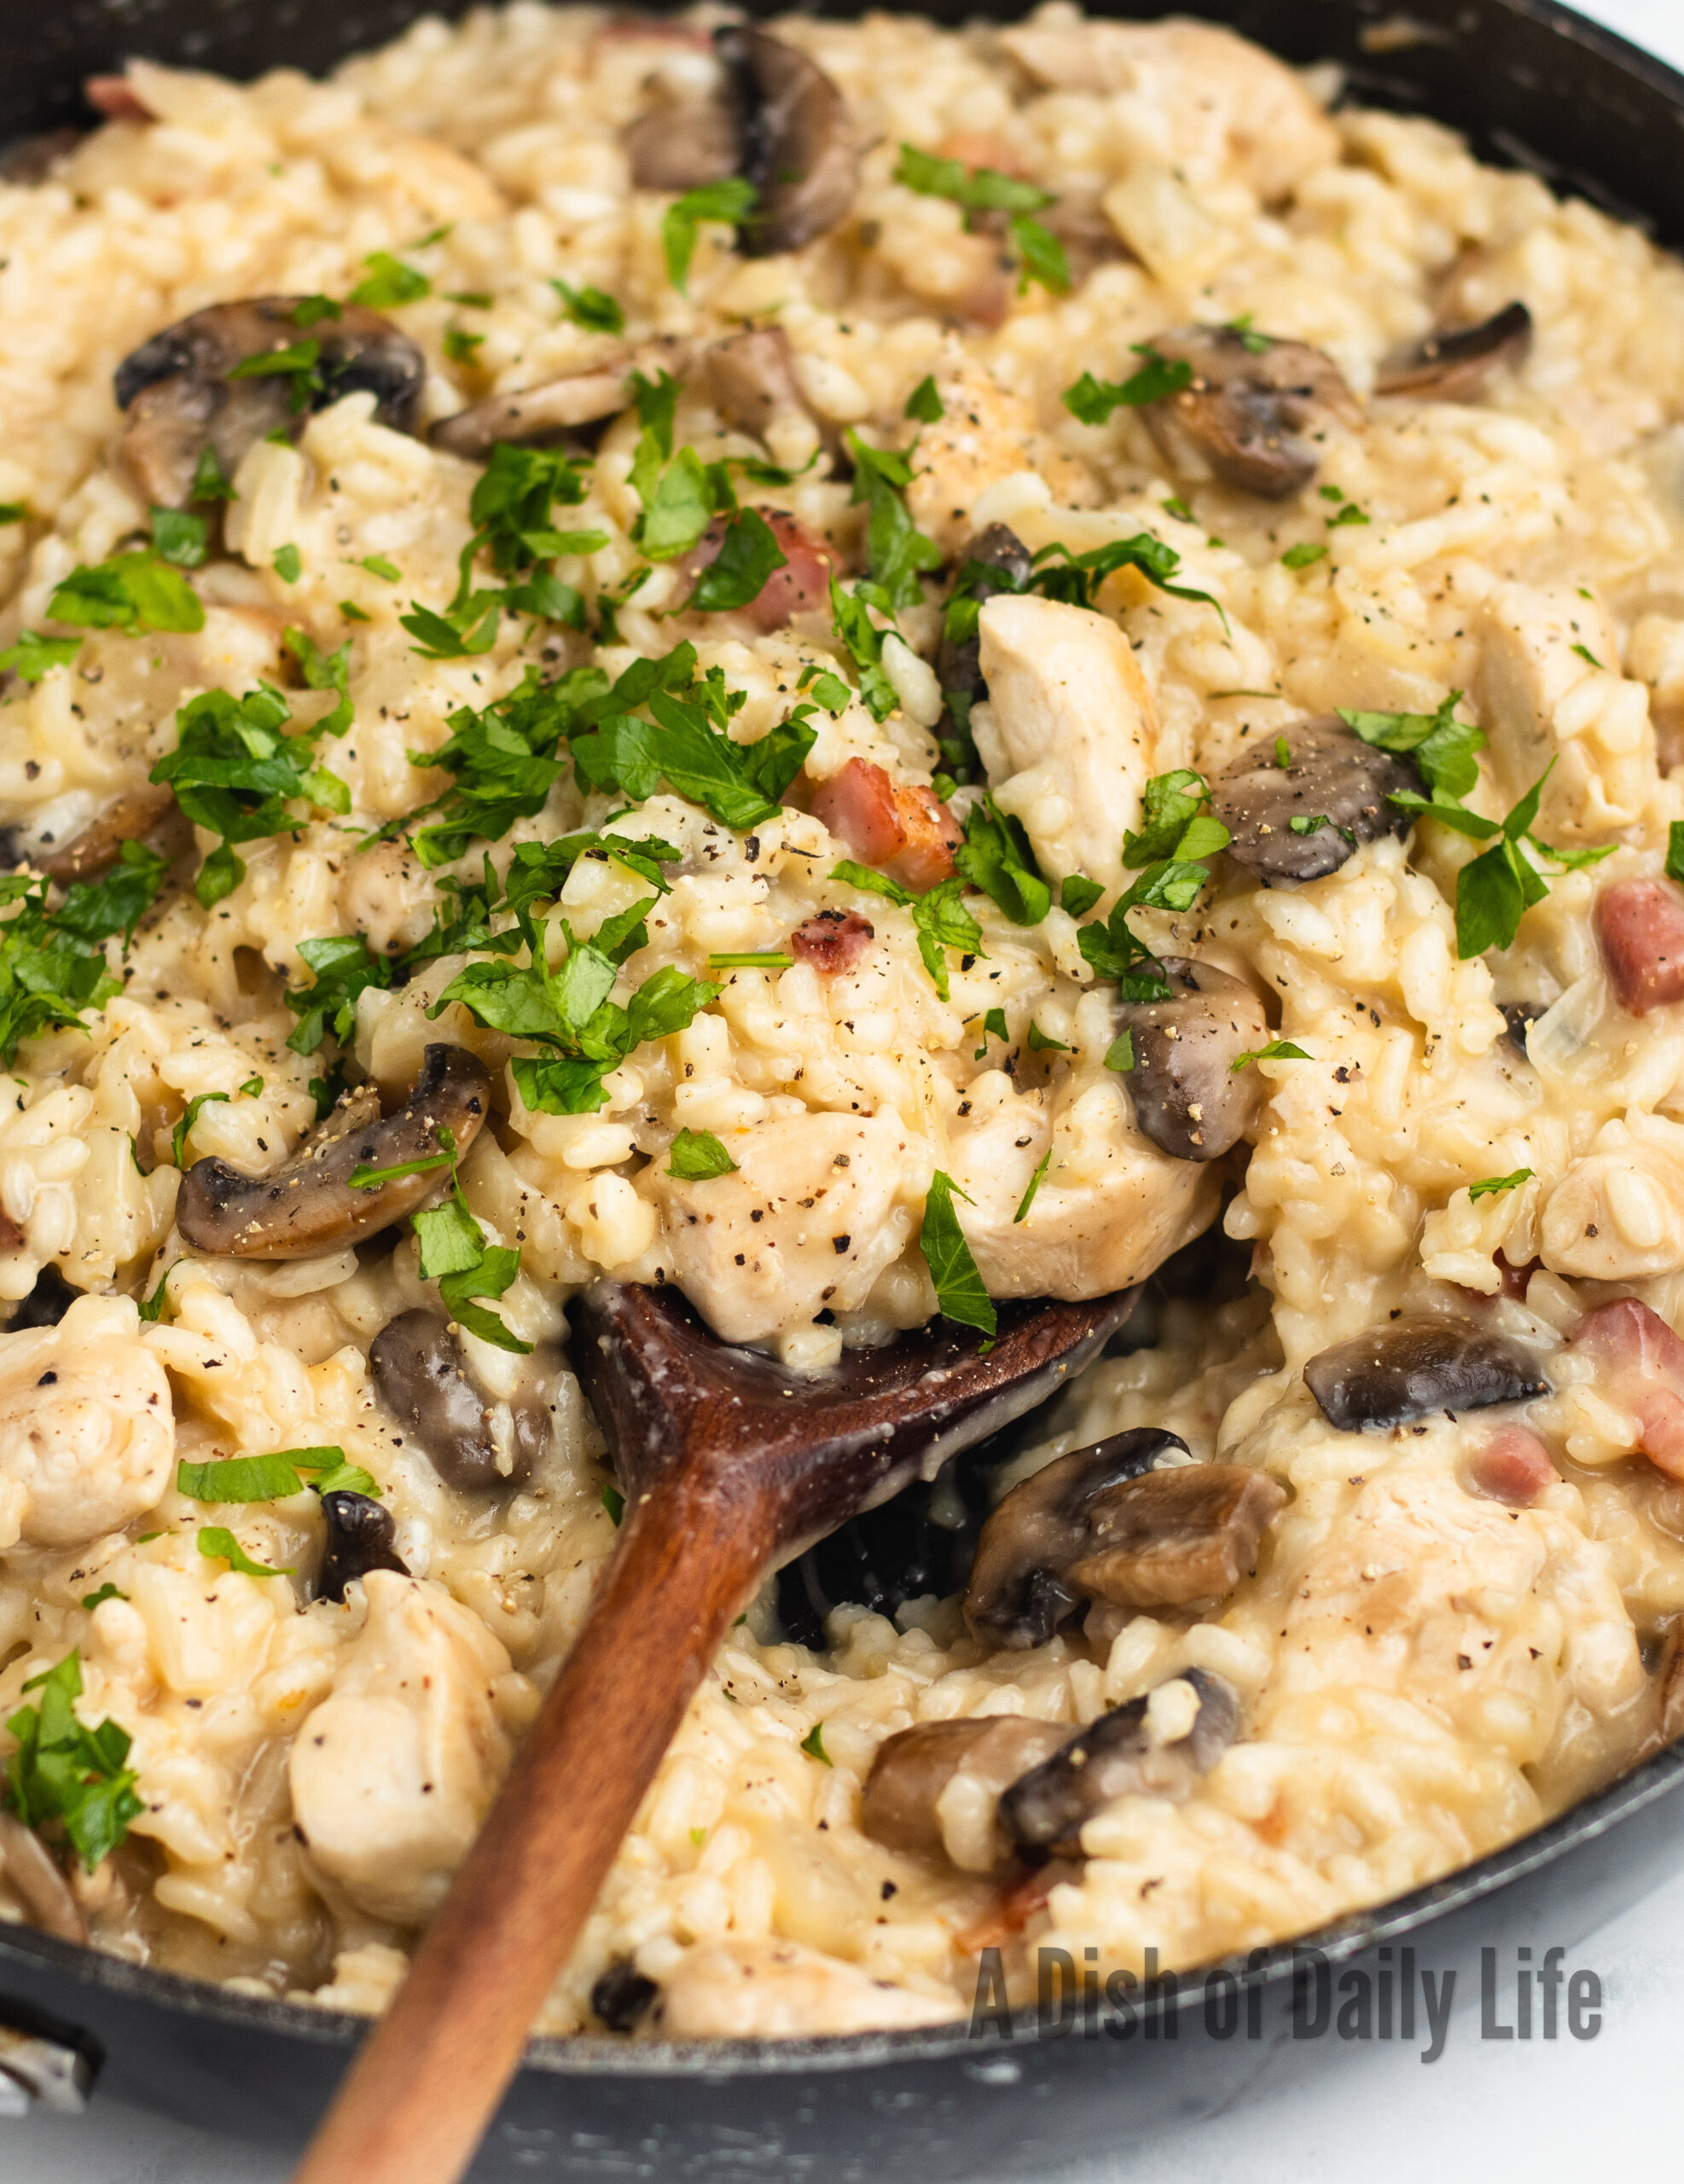 zoomed in image of risotto in pan, ready to serve